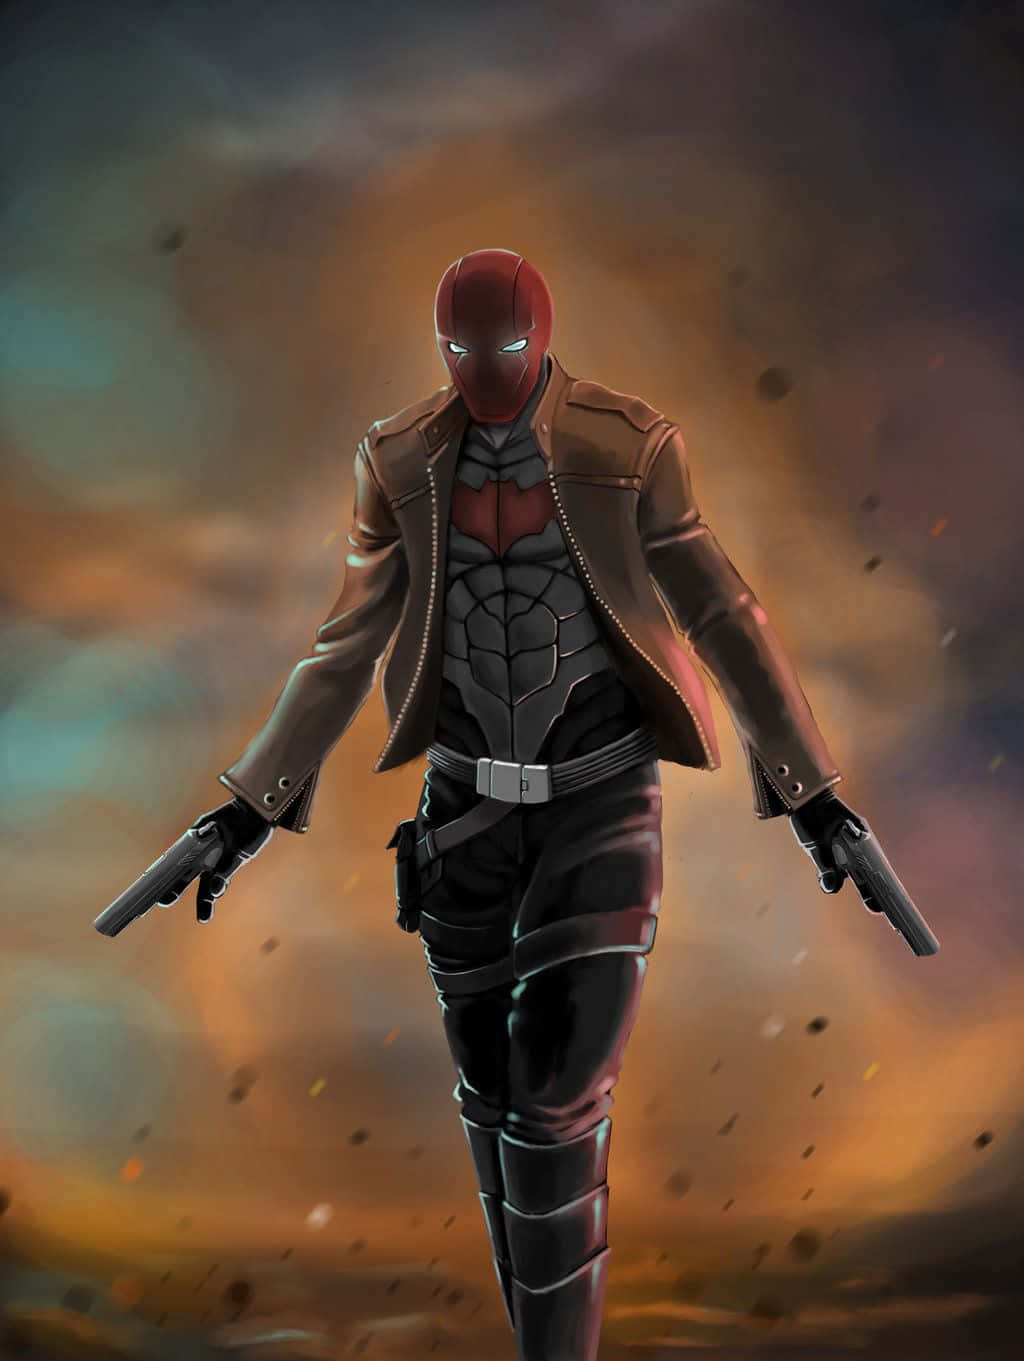 "Don't mess with Red Hood"